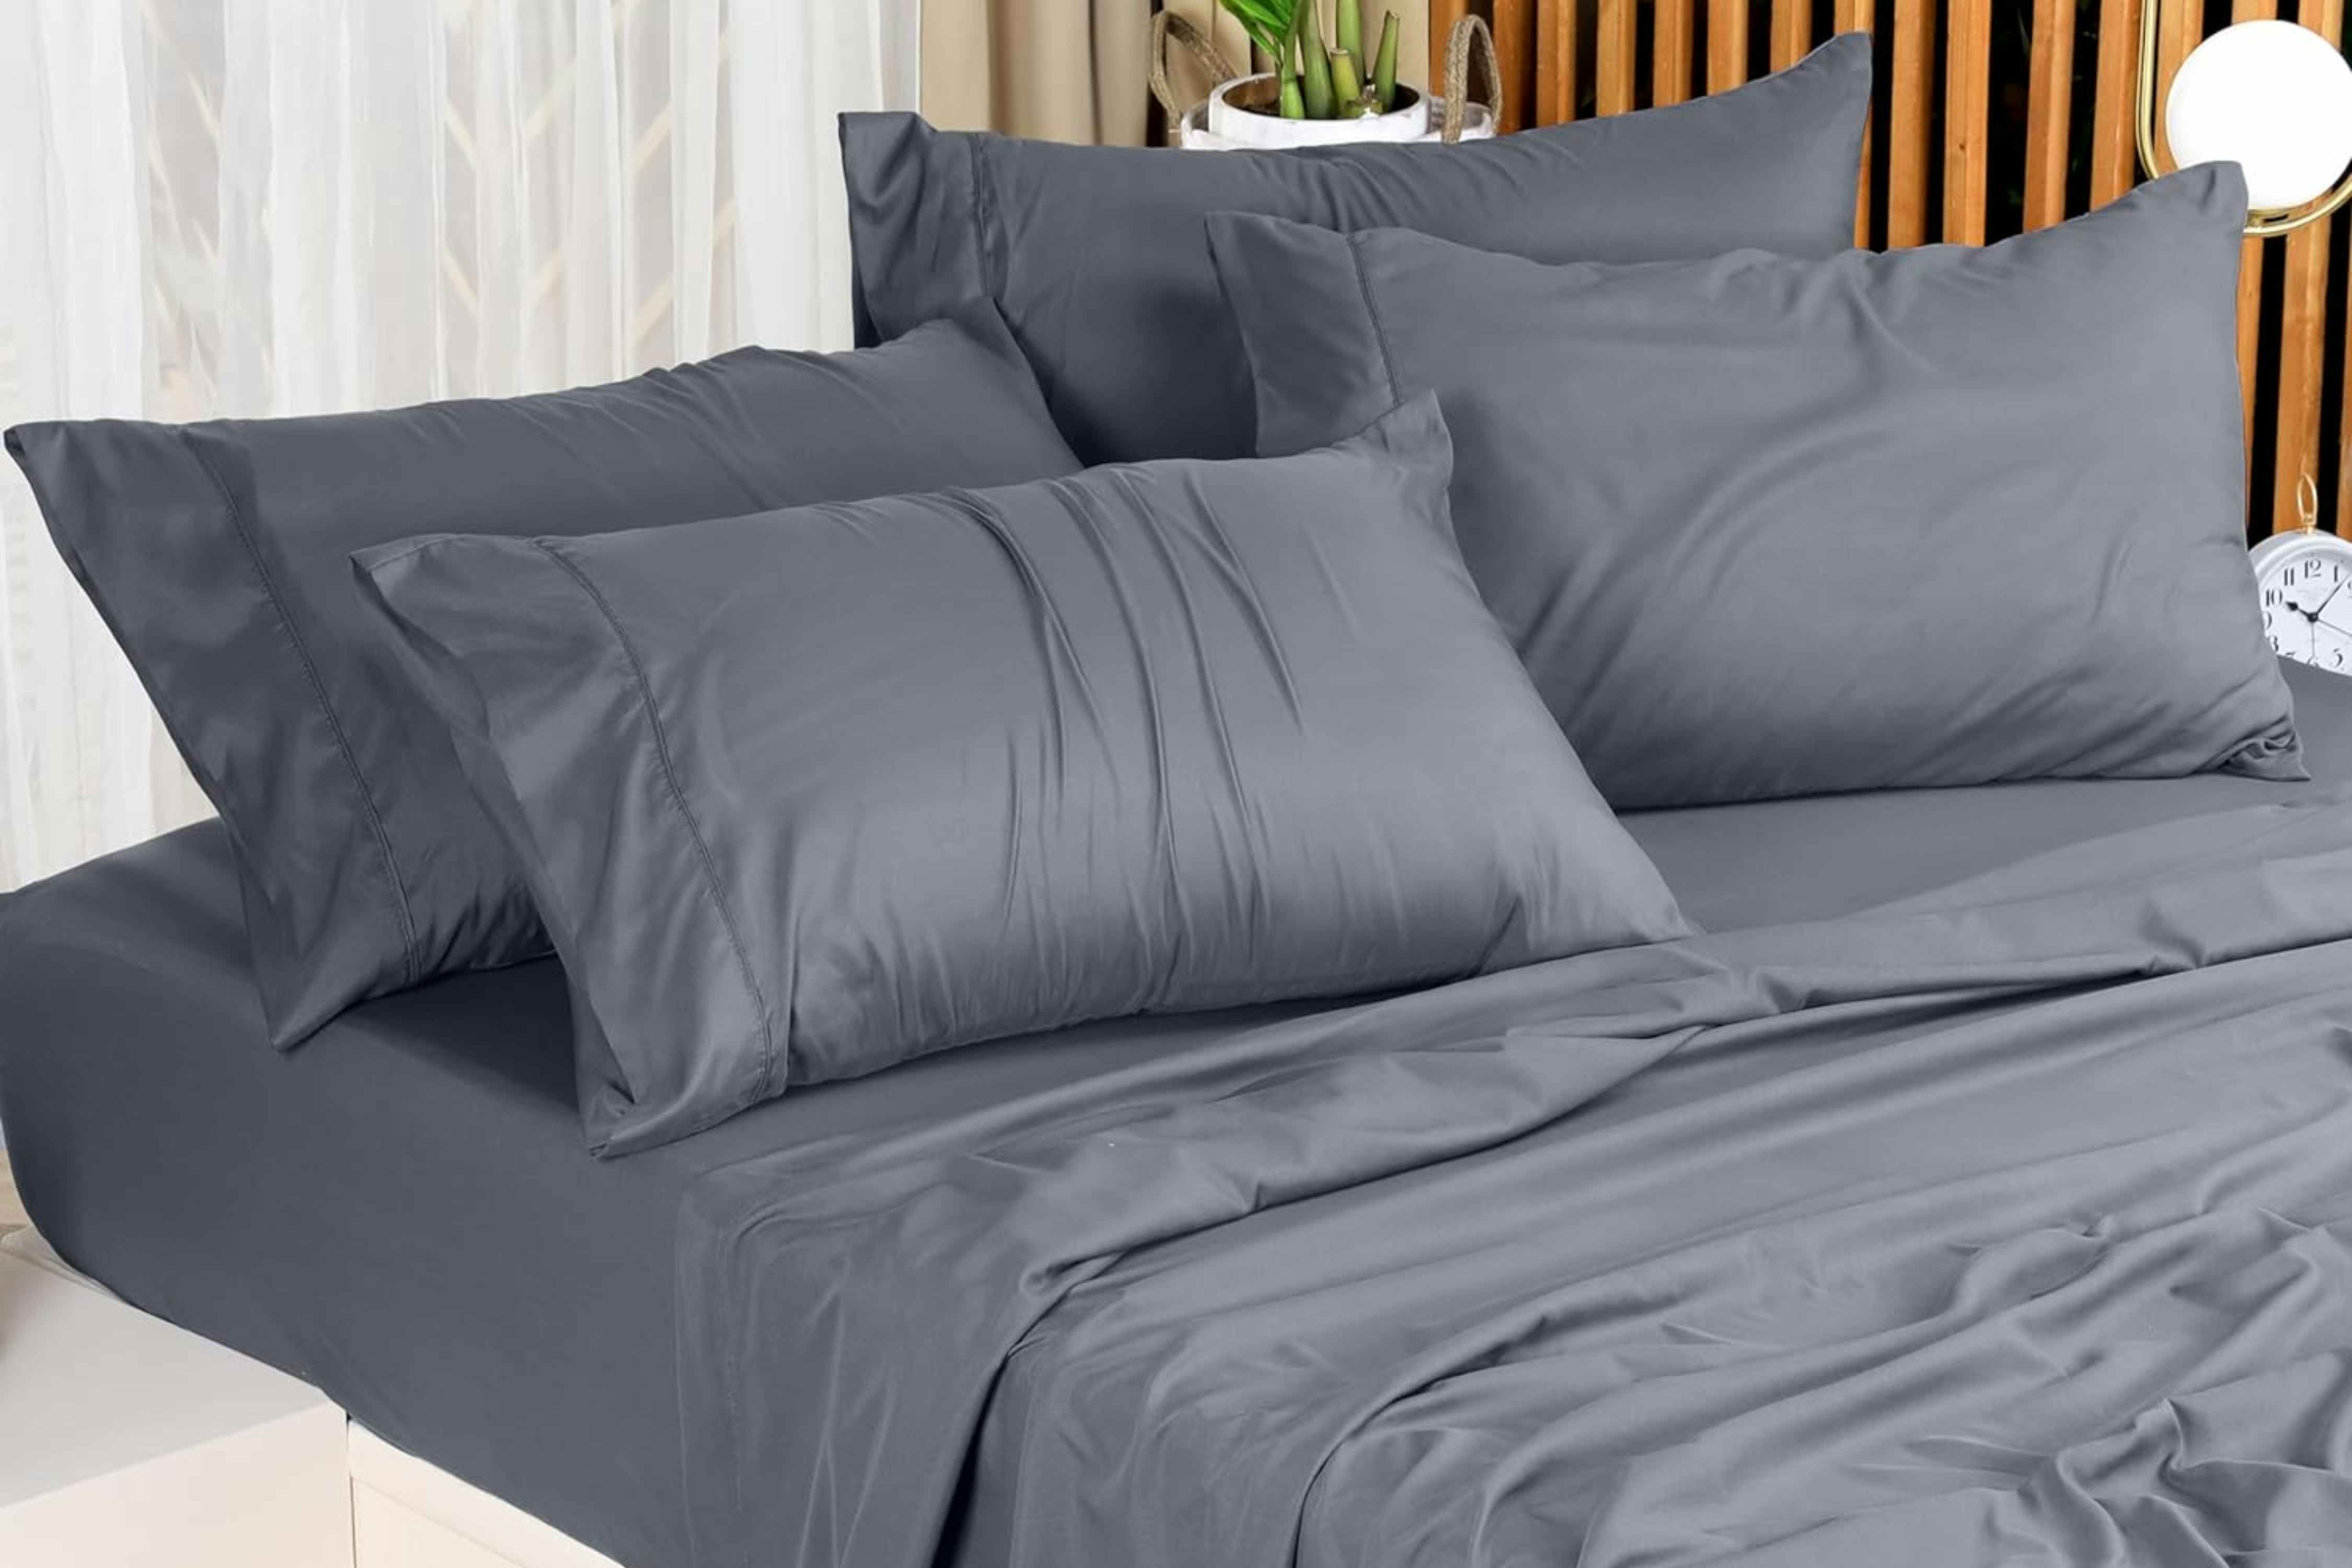 Pay Only $16 for a Queen 4-Piece Sheet Set With 183,829 Reviews on Amazon